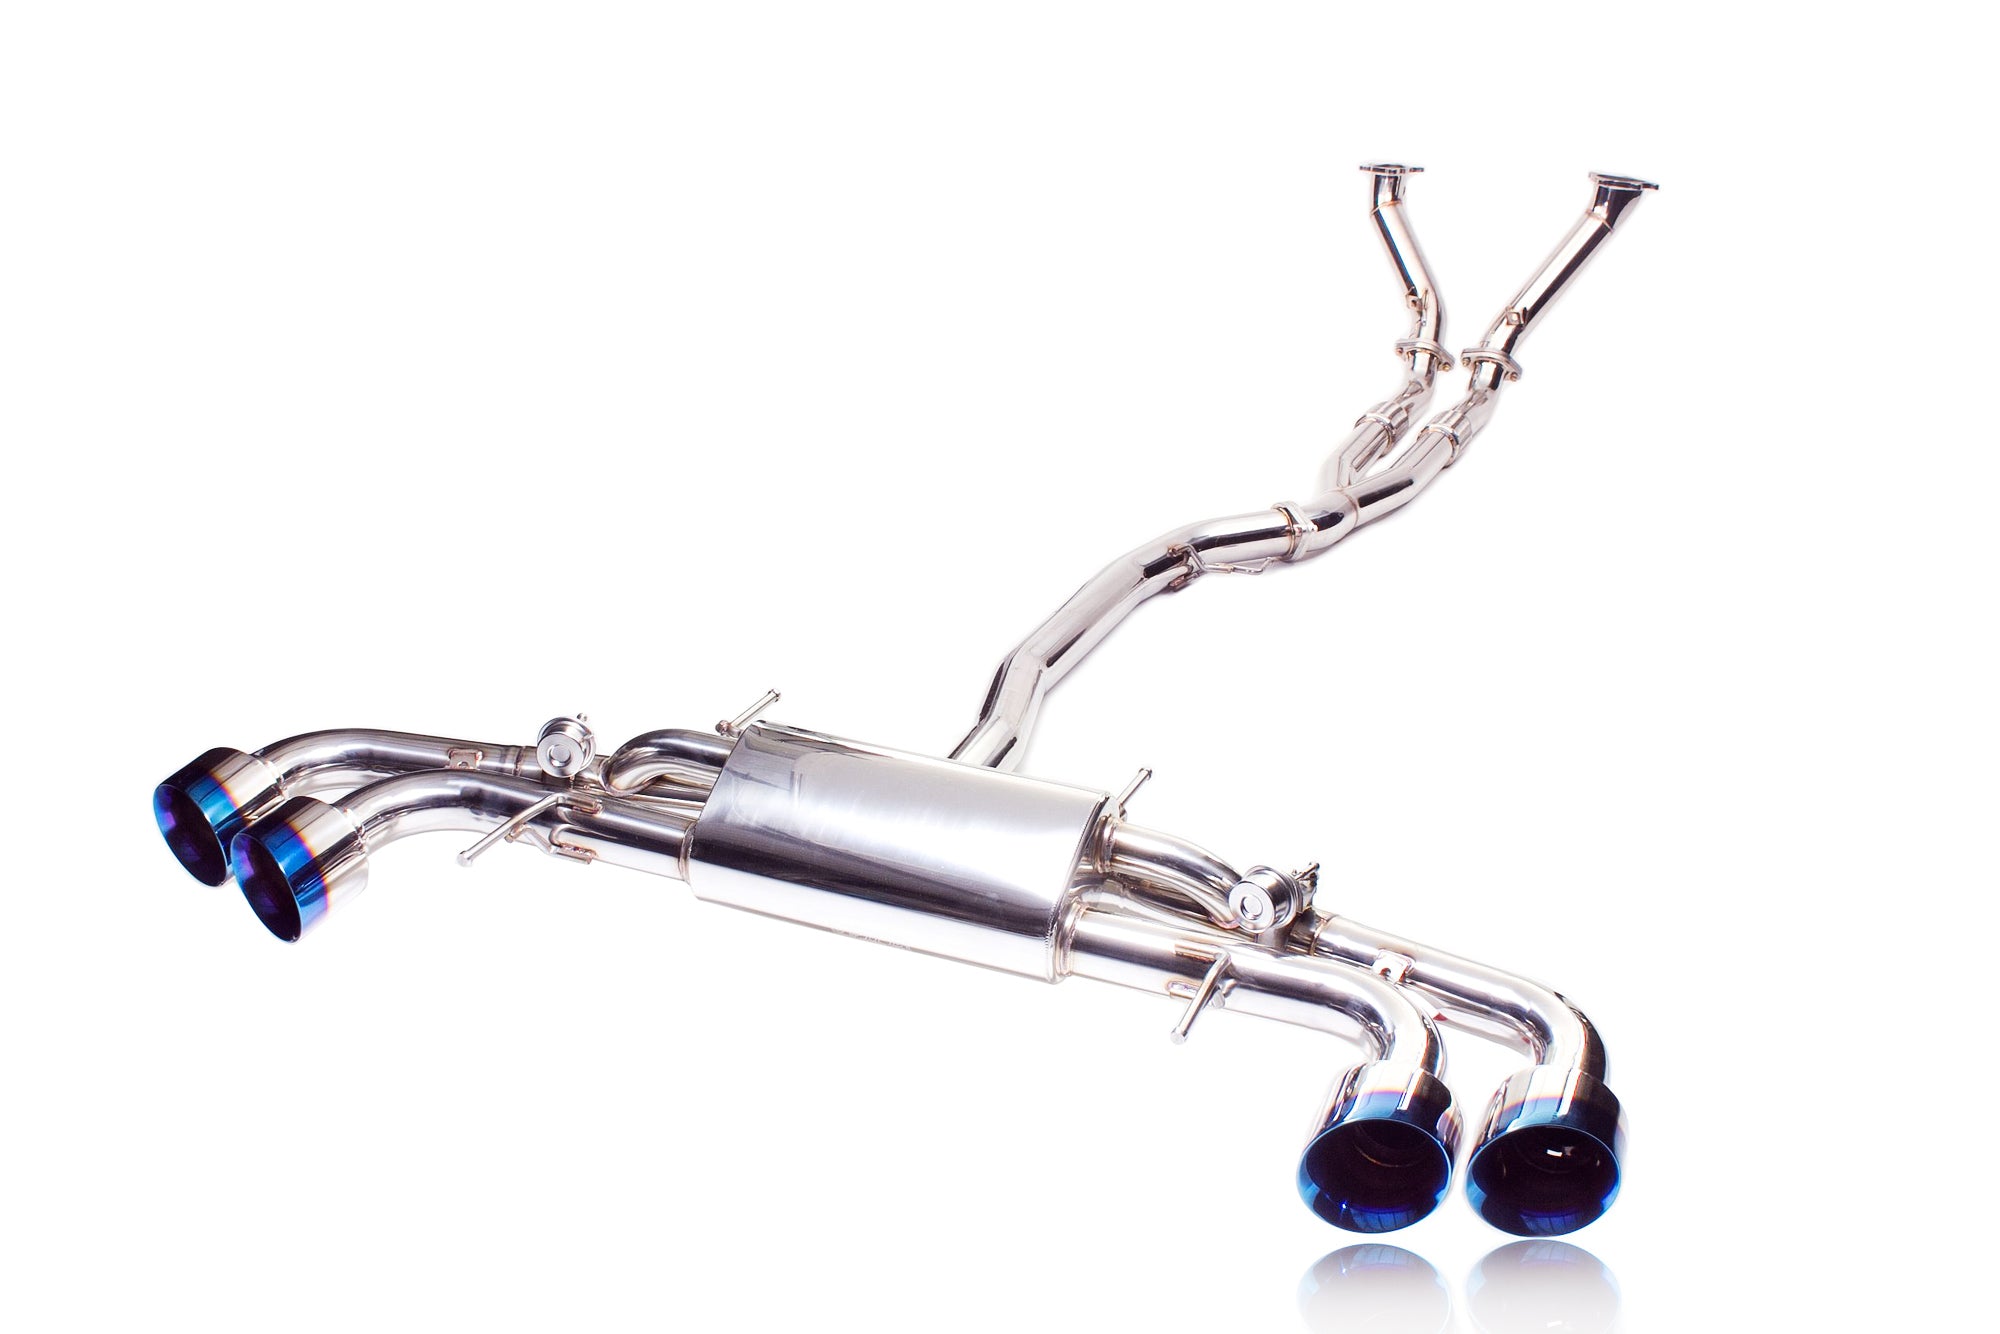 iPE - Valvetronic Exhaust w/ Wired Remote & Gold Tips suit Nissan GT-R (R35) (2007-Current) - MODE Auto Concepts